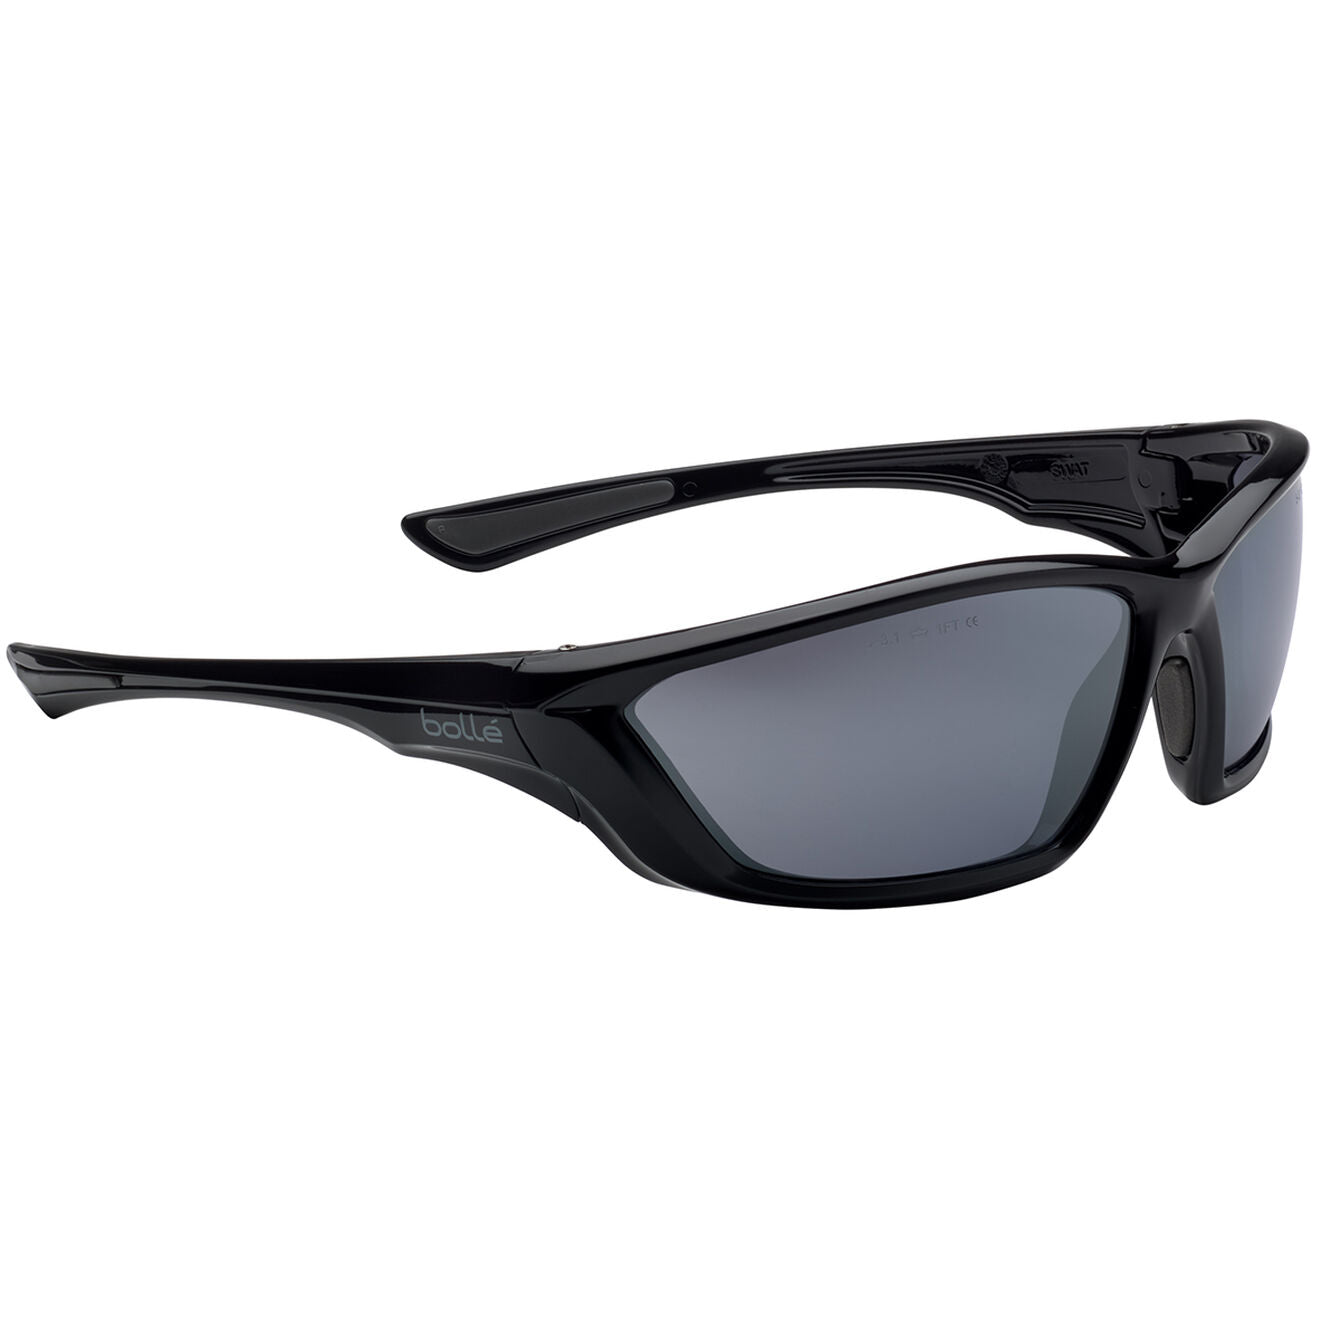 Bolle SWAT SWATFLASH Tactical Ballistic Sunglasses with Silver Flash Lens